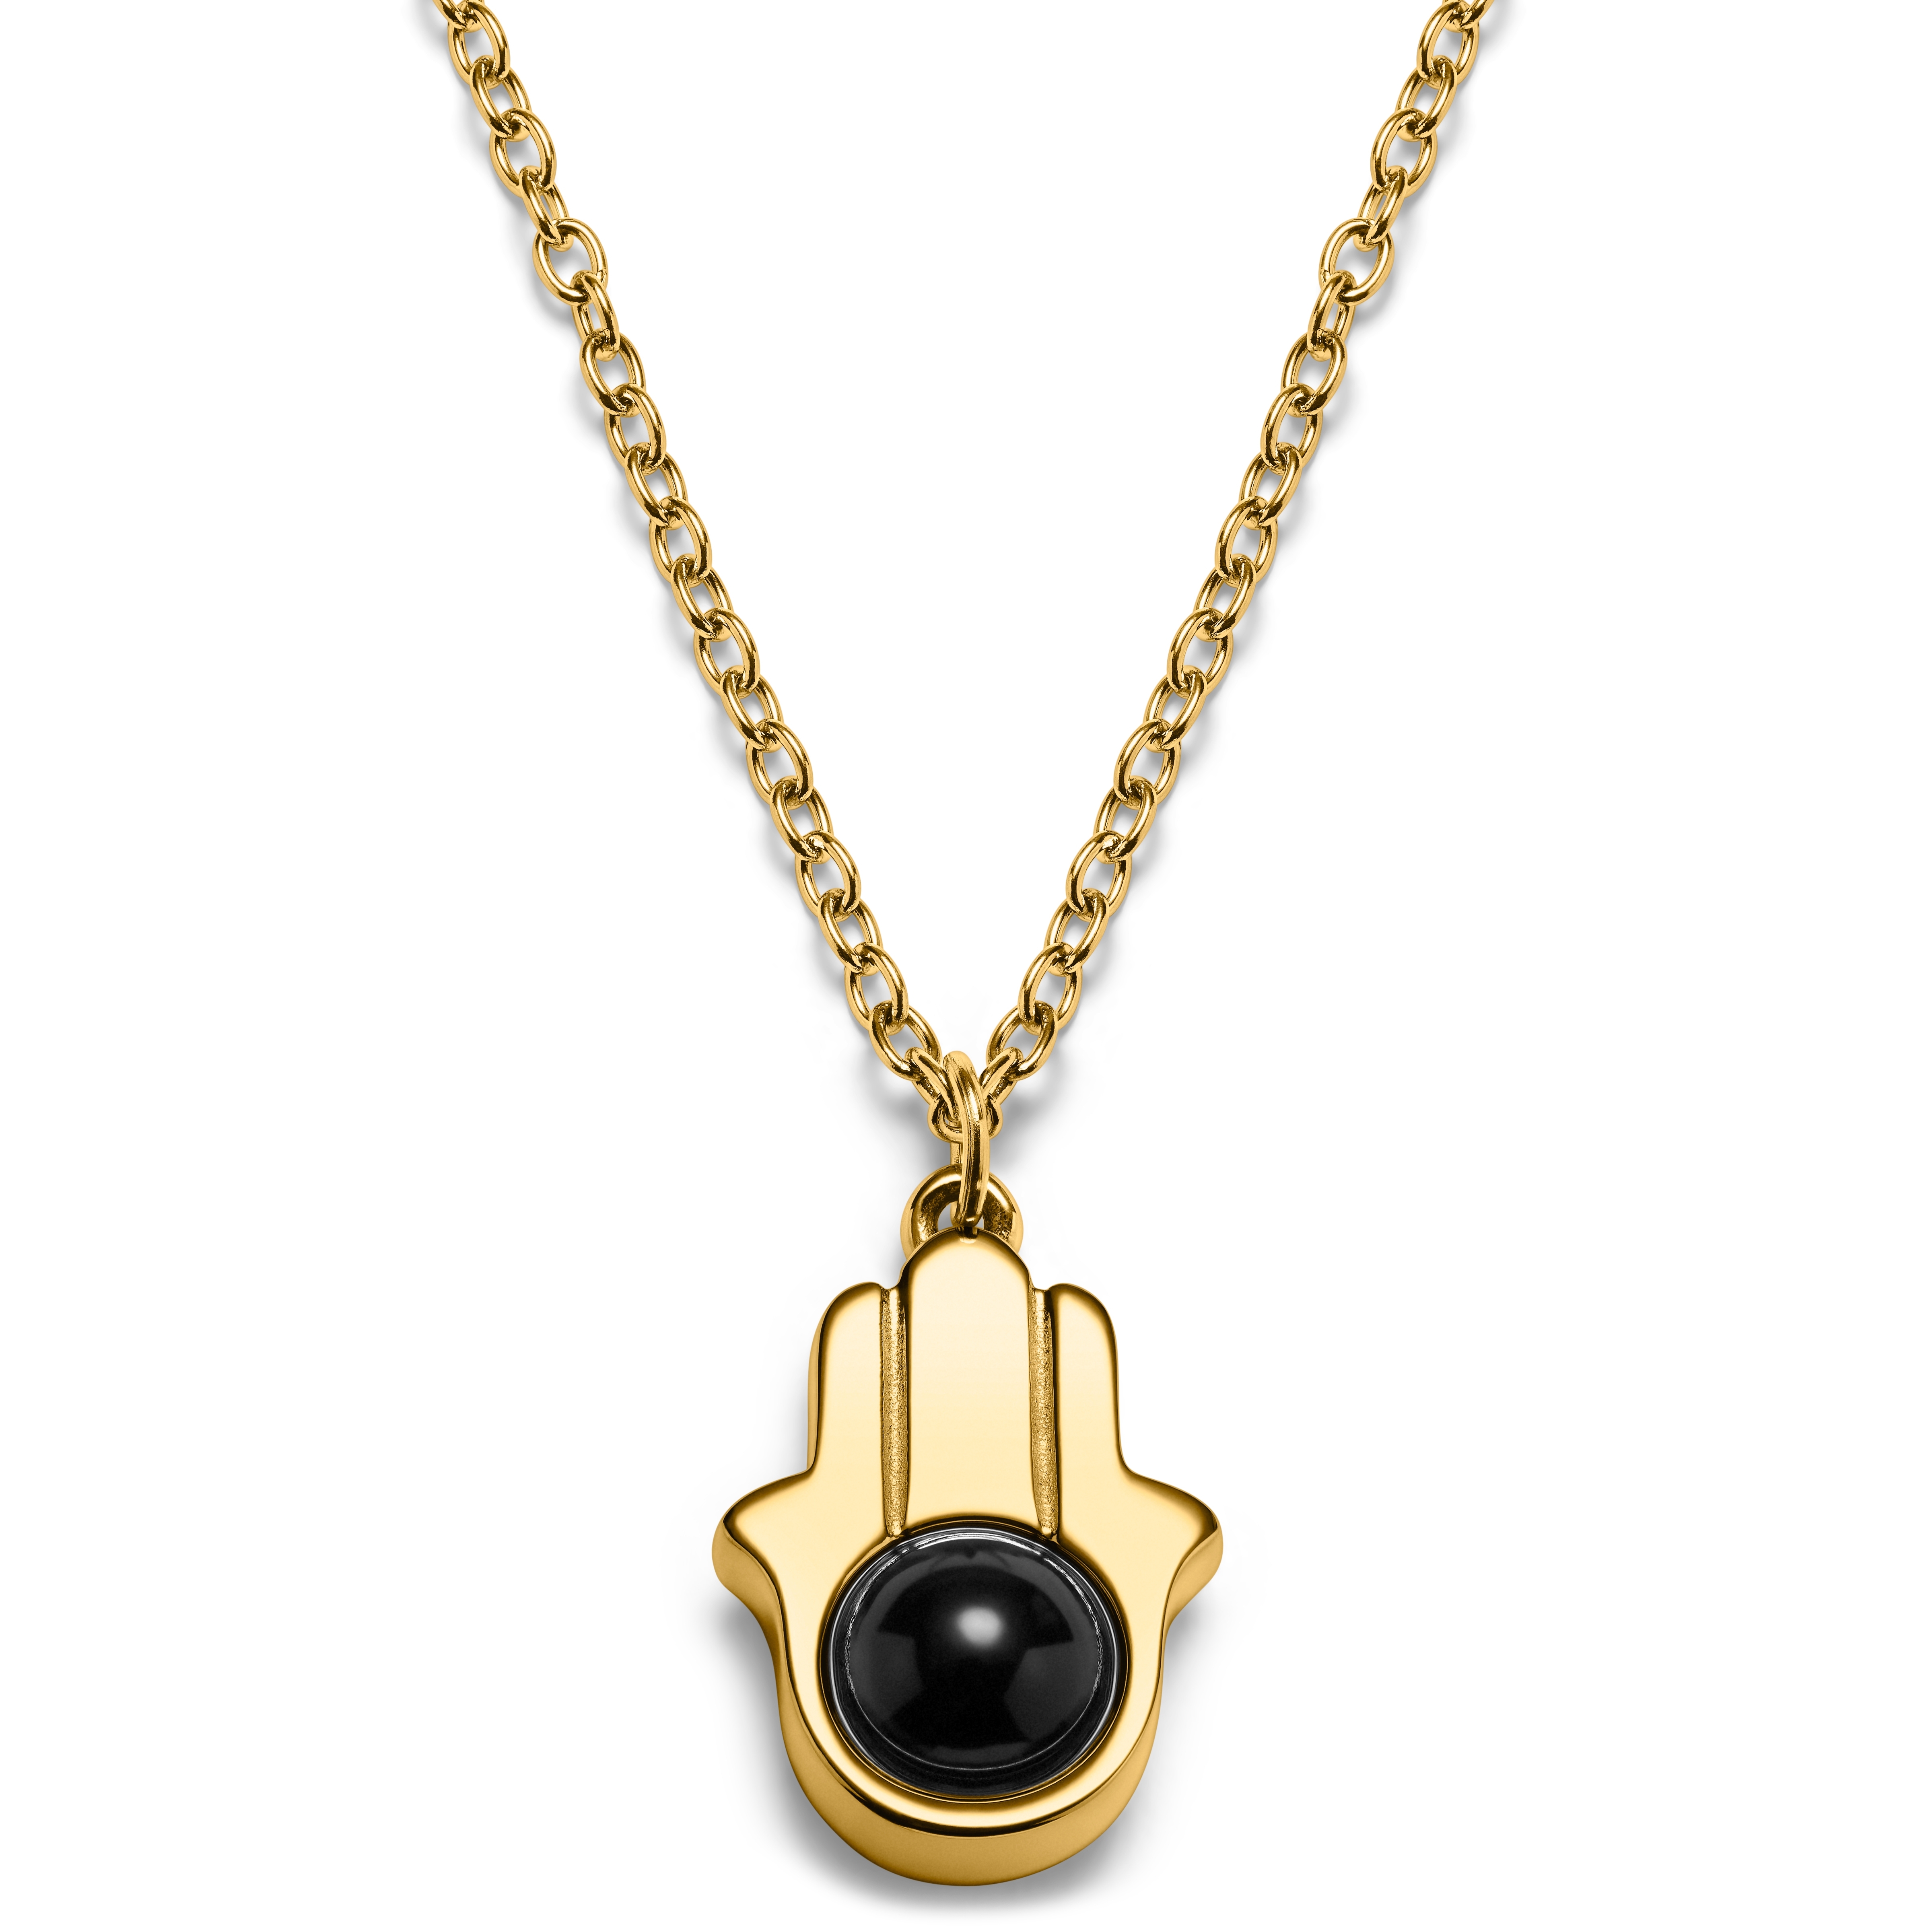 Hamsa Hand Necklace | 9ct Gold - Gear Jewellers